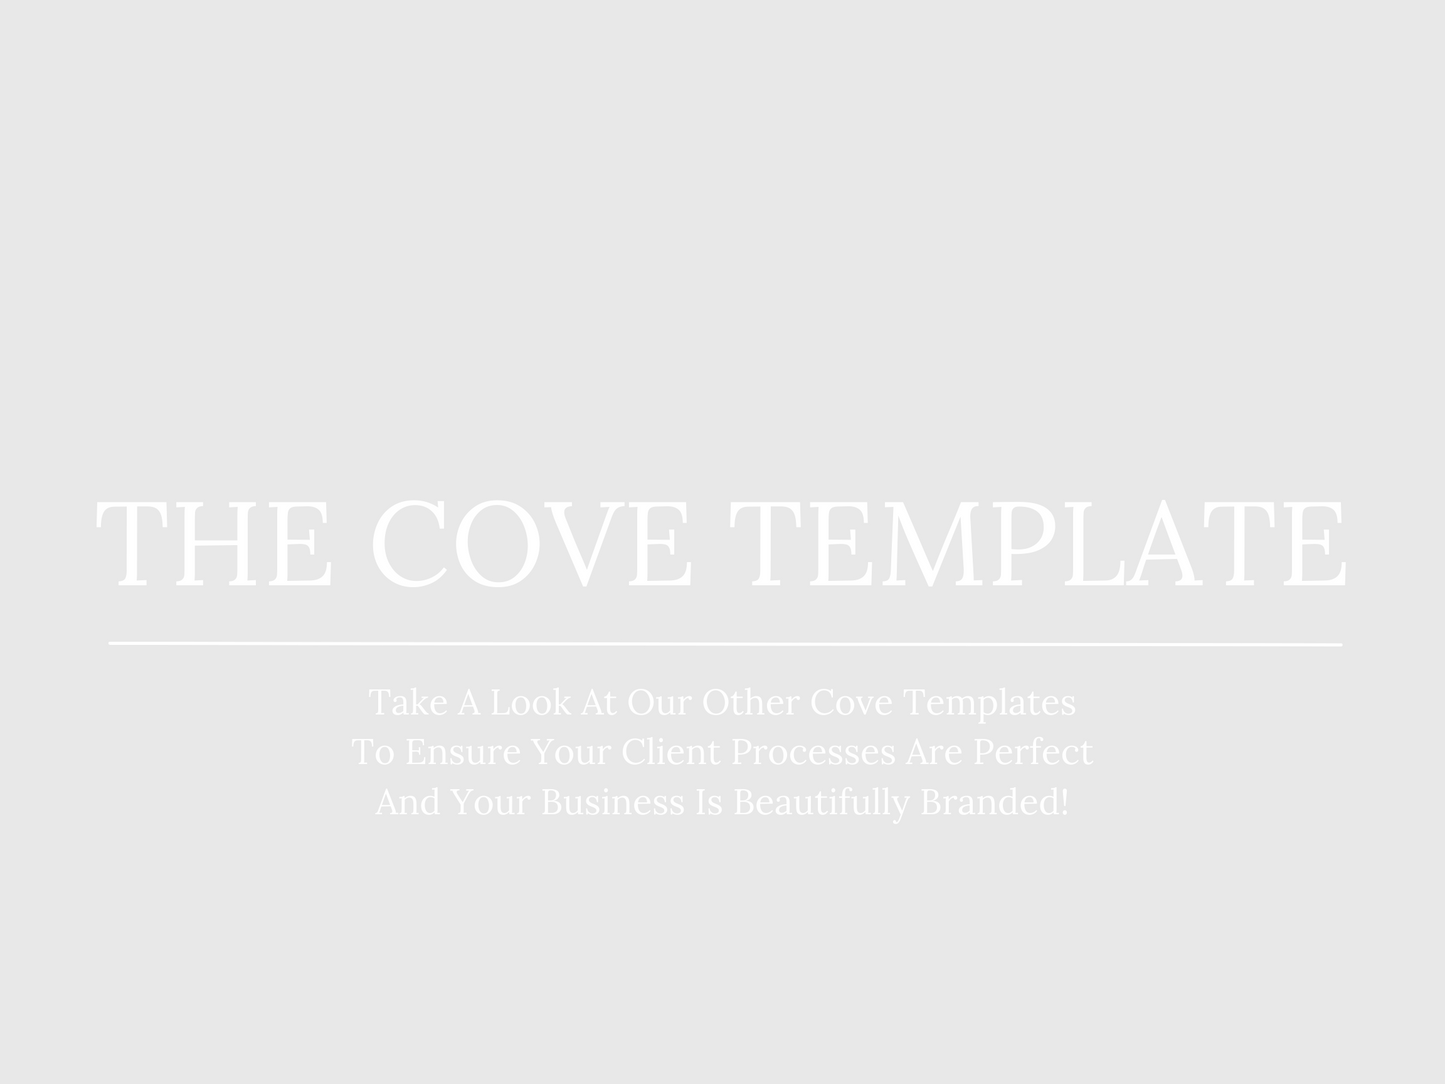 COVE GOODBYE TEMPLATE FOR INTERIOR DESIGNERS